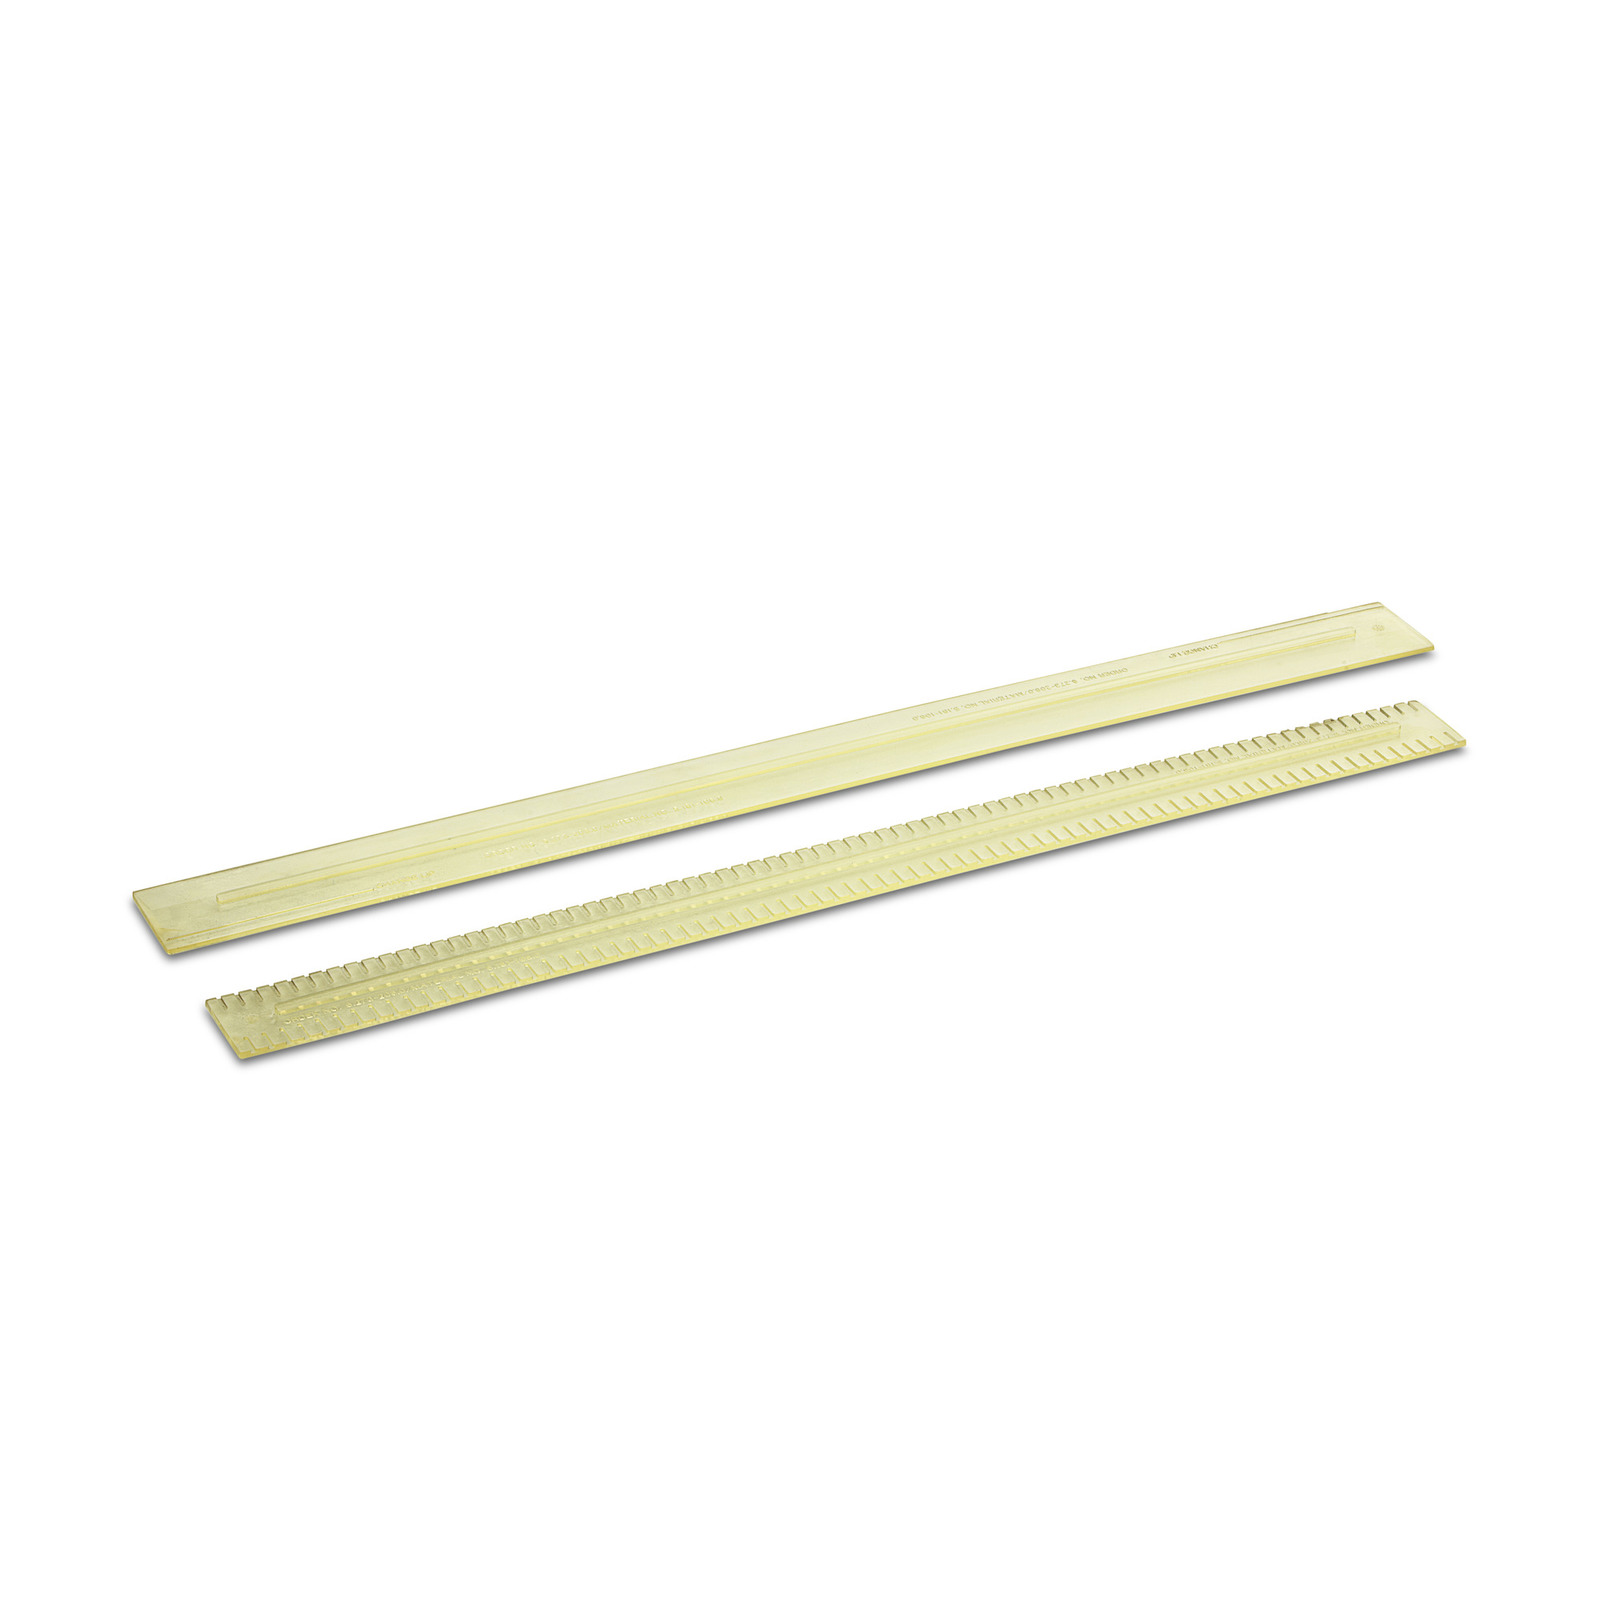 Karcher 6.273-229.0, Squeegee Blades, 35 Inches Inti-stripe Oil Resistant Grooved 890Mm, EAN 4002667749762